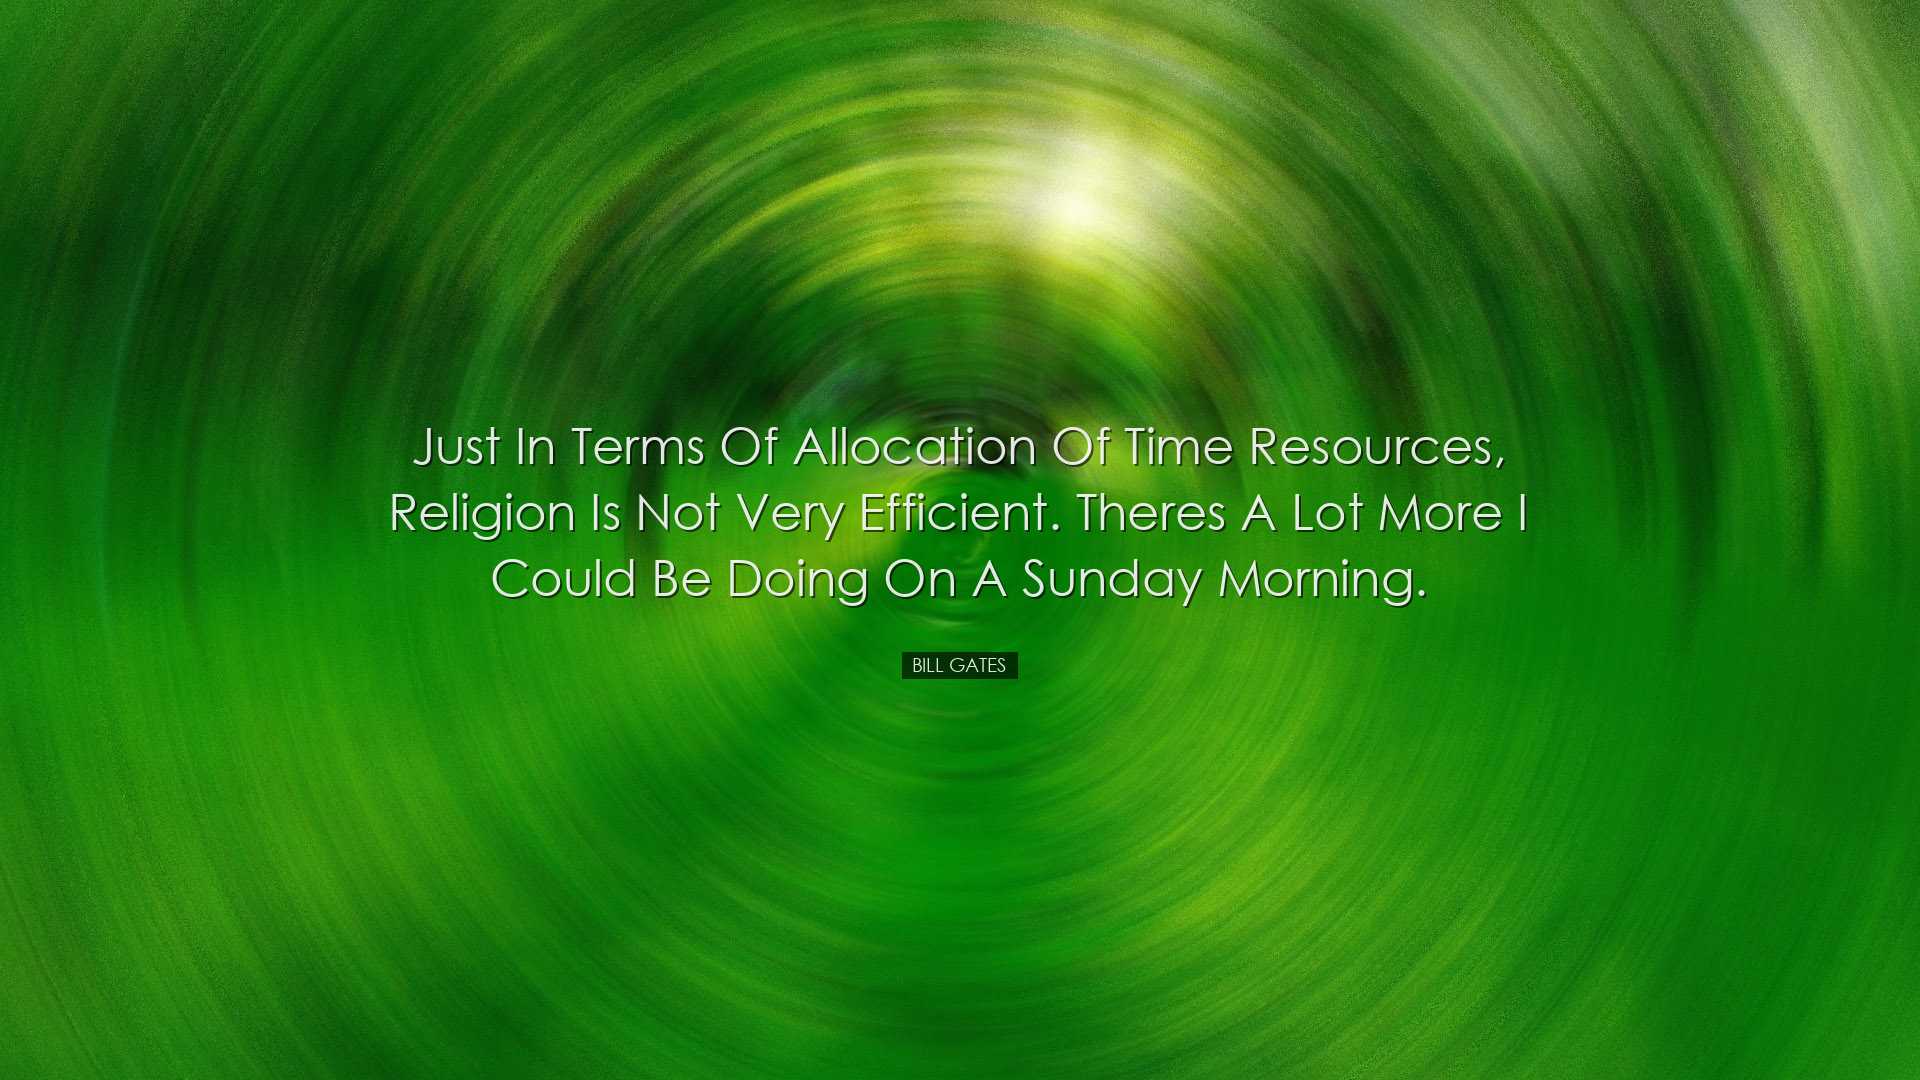 Just in terms of allocation of time resources, religion is not ver